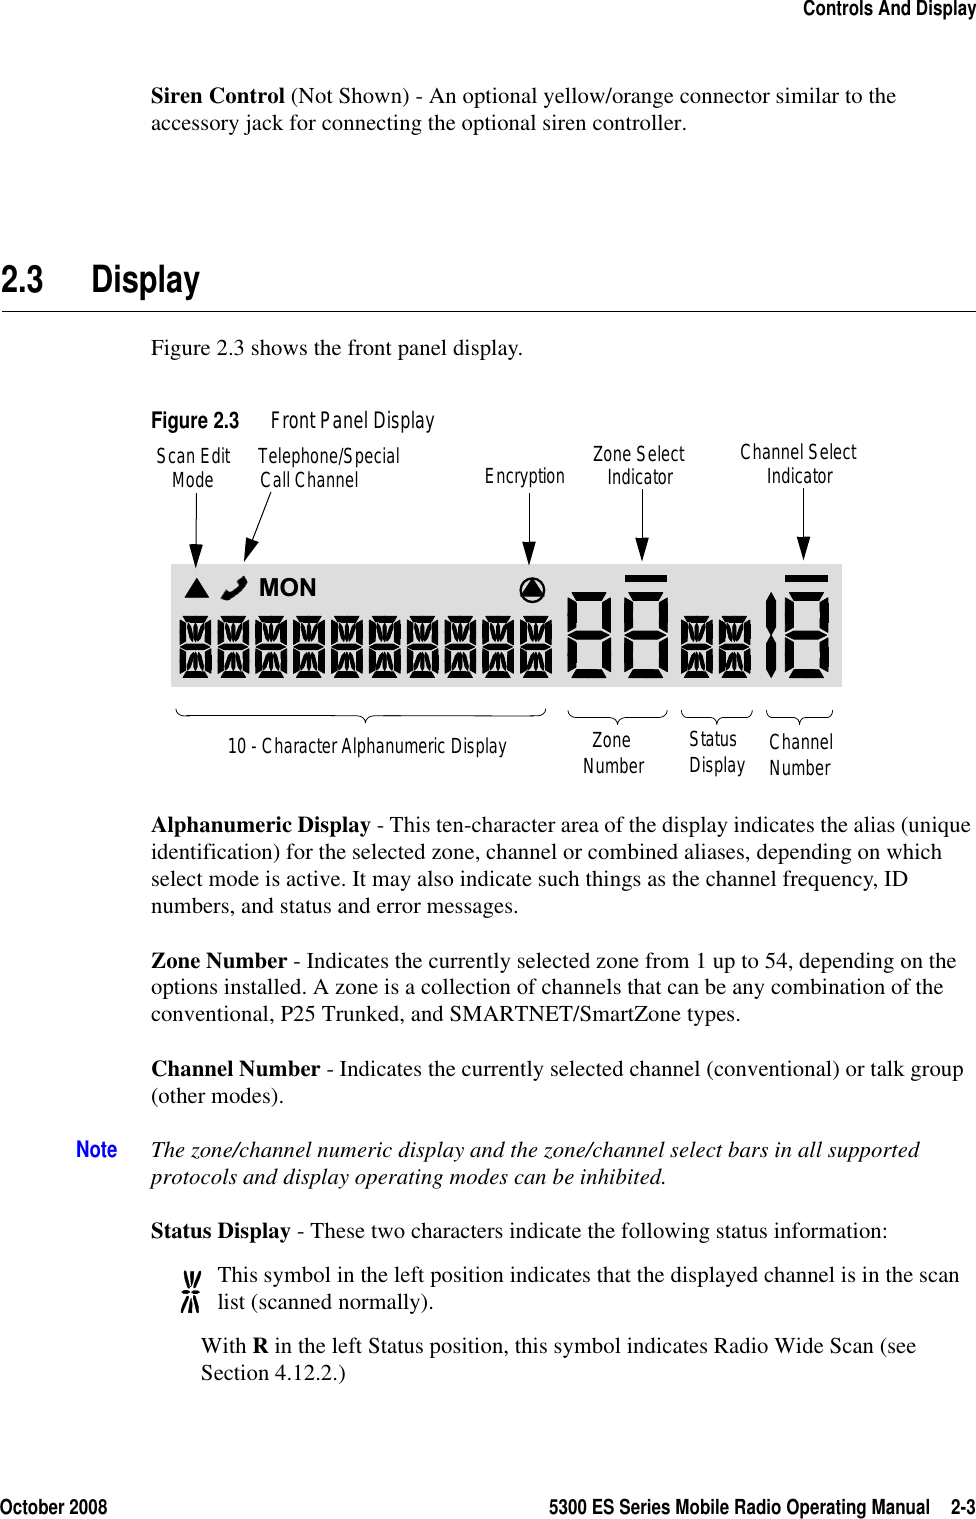 October 2008 5300 ES Series Mobile Radio Operating Manual 2-3Controls And DisplaySiren Control (Not Shown) - An optional yellow/orange connector similar to the accessory jack for connecting the optional siren controller.2.3 DisplayFigure 2.3 shows the front panel display.Figure 2.3 Front Panel DisplayAlphanumeric Display - This ten-character area of the display indicates the alias (unique identification) for the selected zone, channel or combined aliases, depending on which select mode is active. It may also indicate such things as the channel frequency, ID numbers, and status and error messages.Zone Number - Indicates the currently selected zone from 1 up to 54, depending on the options installed. A zone is a collection of channels that can be any combination of the conventional, P25 Trunked, and SMARTNET/SmartZone types.Channel Number - Indicates the currently selected channel (conventional) or talk group (other modes).Note The zone/channel numeric display and the zone/channel select bars in all supported protocols and display operating modes can be inhibited.Status Display - These two characters indicate the following status information:This symbol in the left position indicates that the displayed channel is in the scan list (scanned normally).With R in the left Status position, this symbol indicates Radio Wide Scan (see Section 4.12.2.)MON10 - Character Alphanumeric Display ZoneNumber StatusDisplay ChannelNumberScan EditModeTelephone/SpecialCall Channel Encryption Channel SelectIndicatorZone SelectIndicator